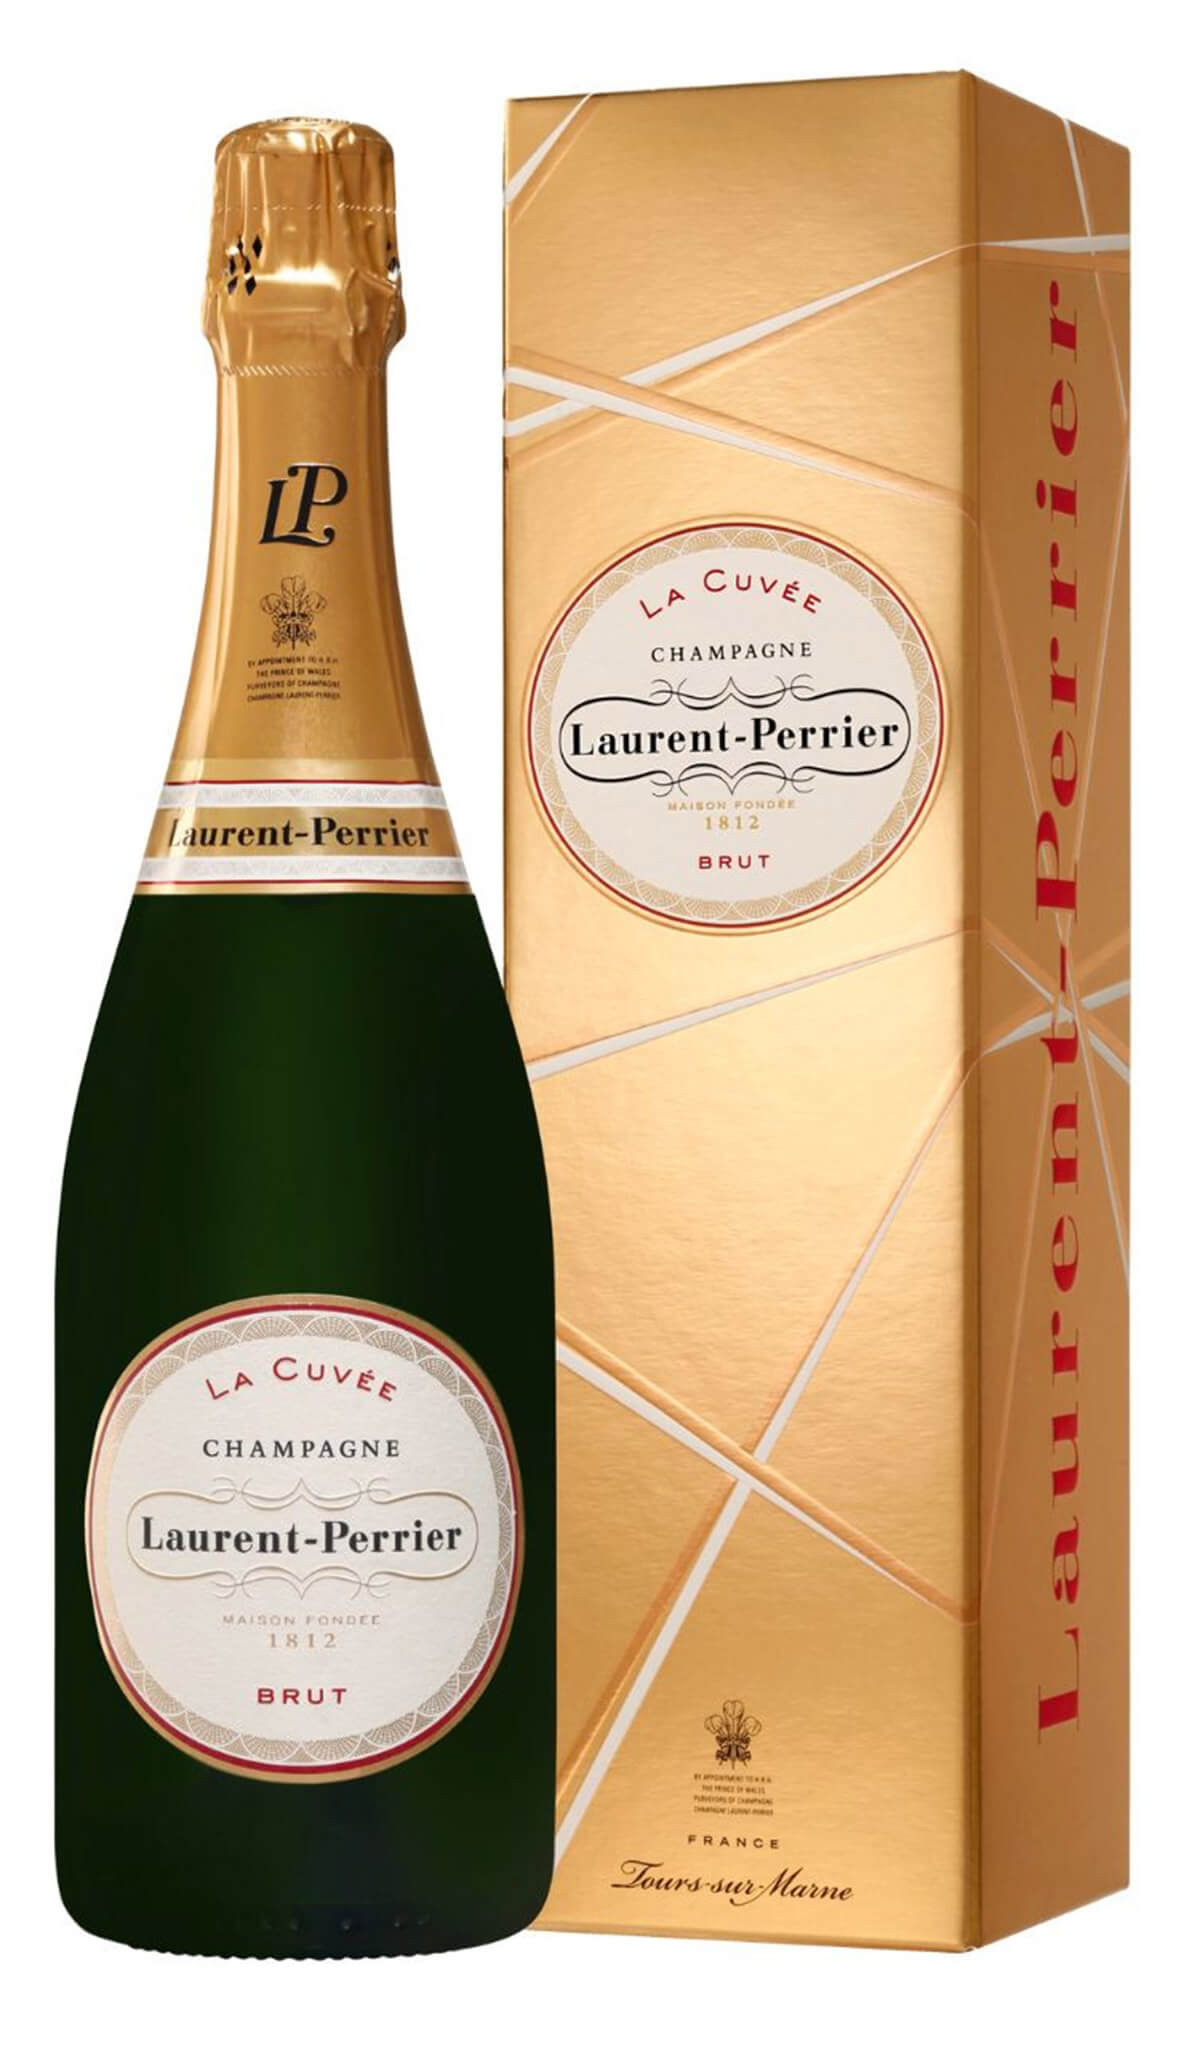 Find out more or buy Laurent-Perrier La Cuvée Champagne NV 750mL (France) online at Wine Sellers Direct - Australia’s independent liquor specialists.